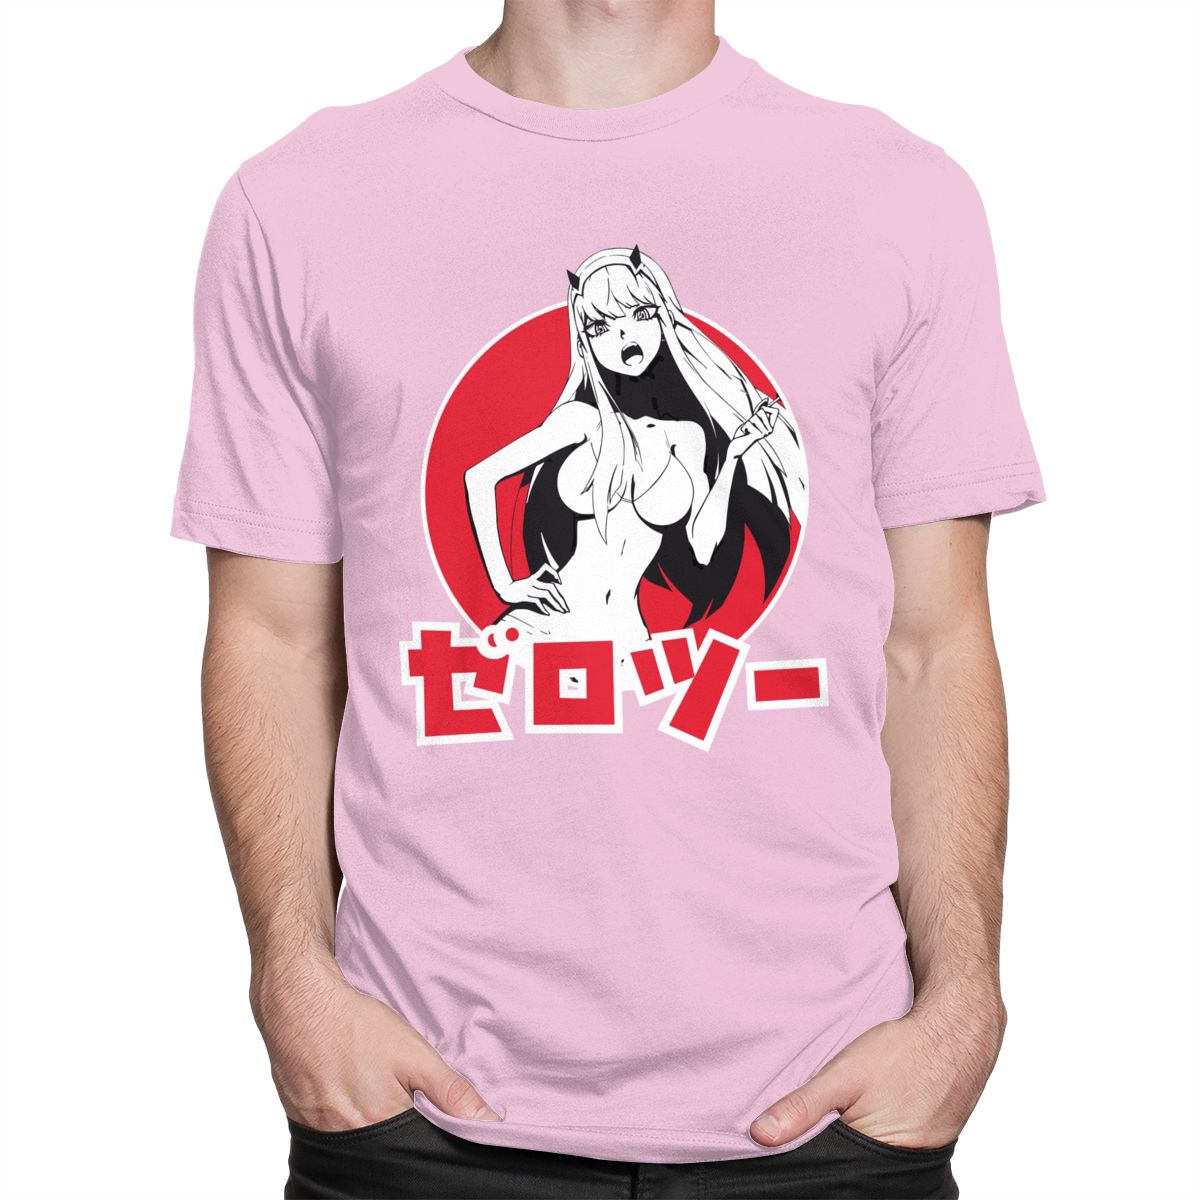 Anime Attractive Girl T-Shirt - Pink / S